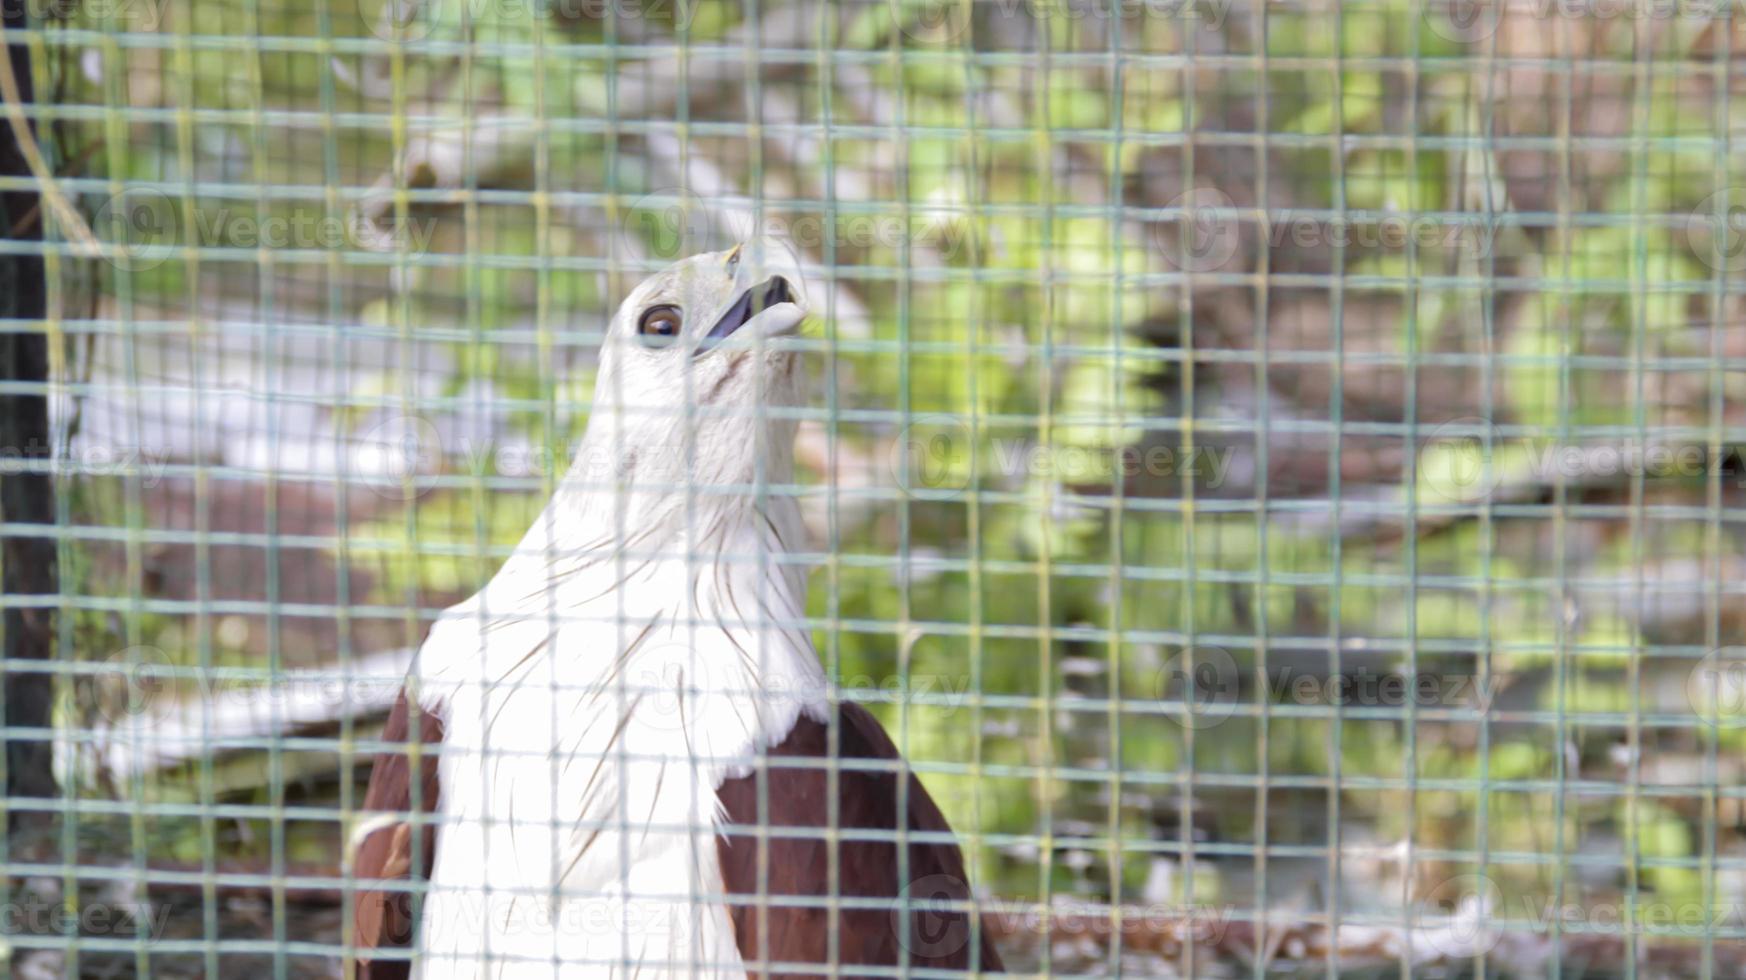 Brahminy kite or brown hawk, falcon or white head eagle in a cage. photo